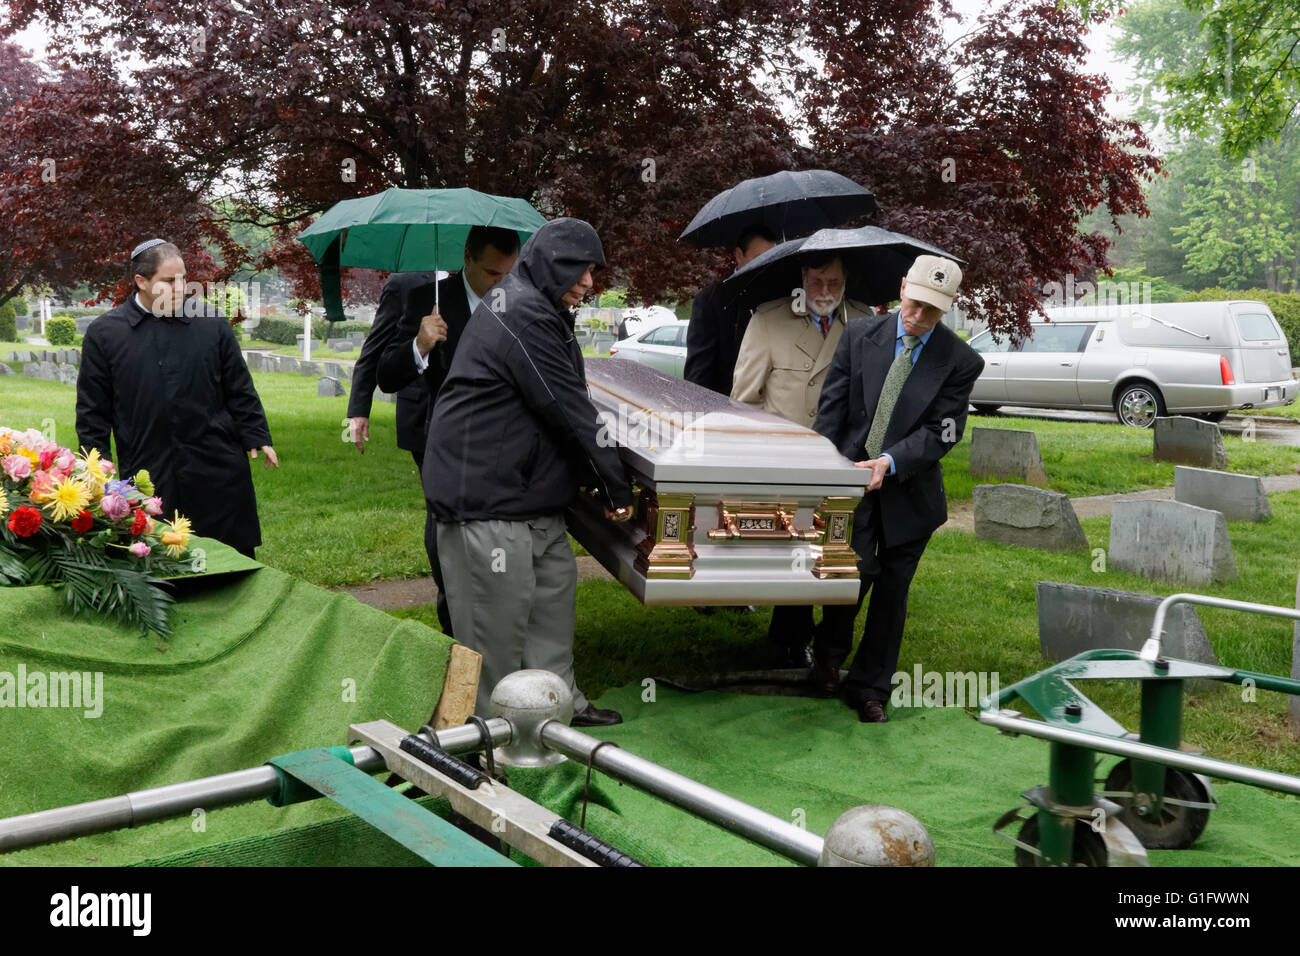 A burial at Har Jehuda cemetery in Upper Darby, Pa. Stock Photo